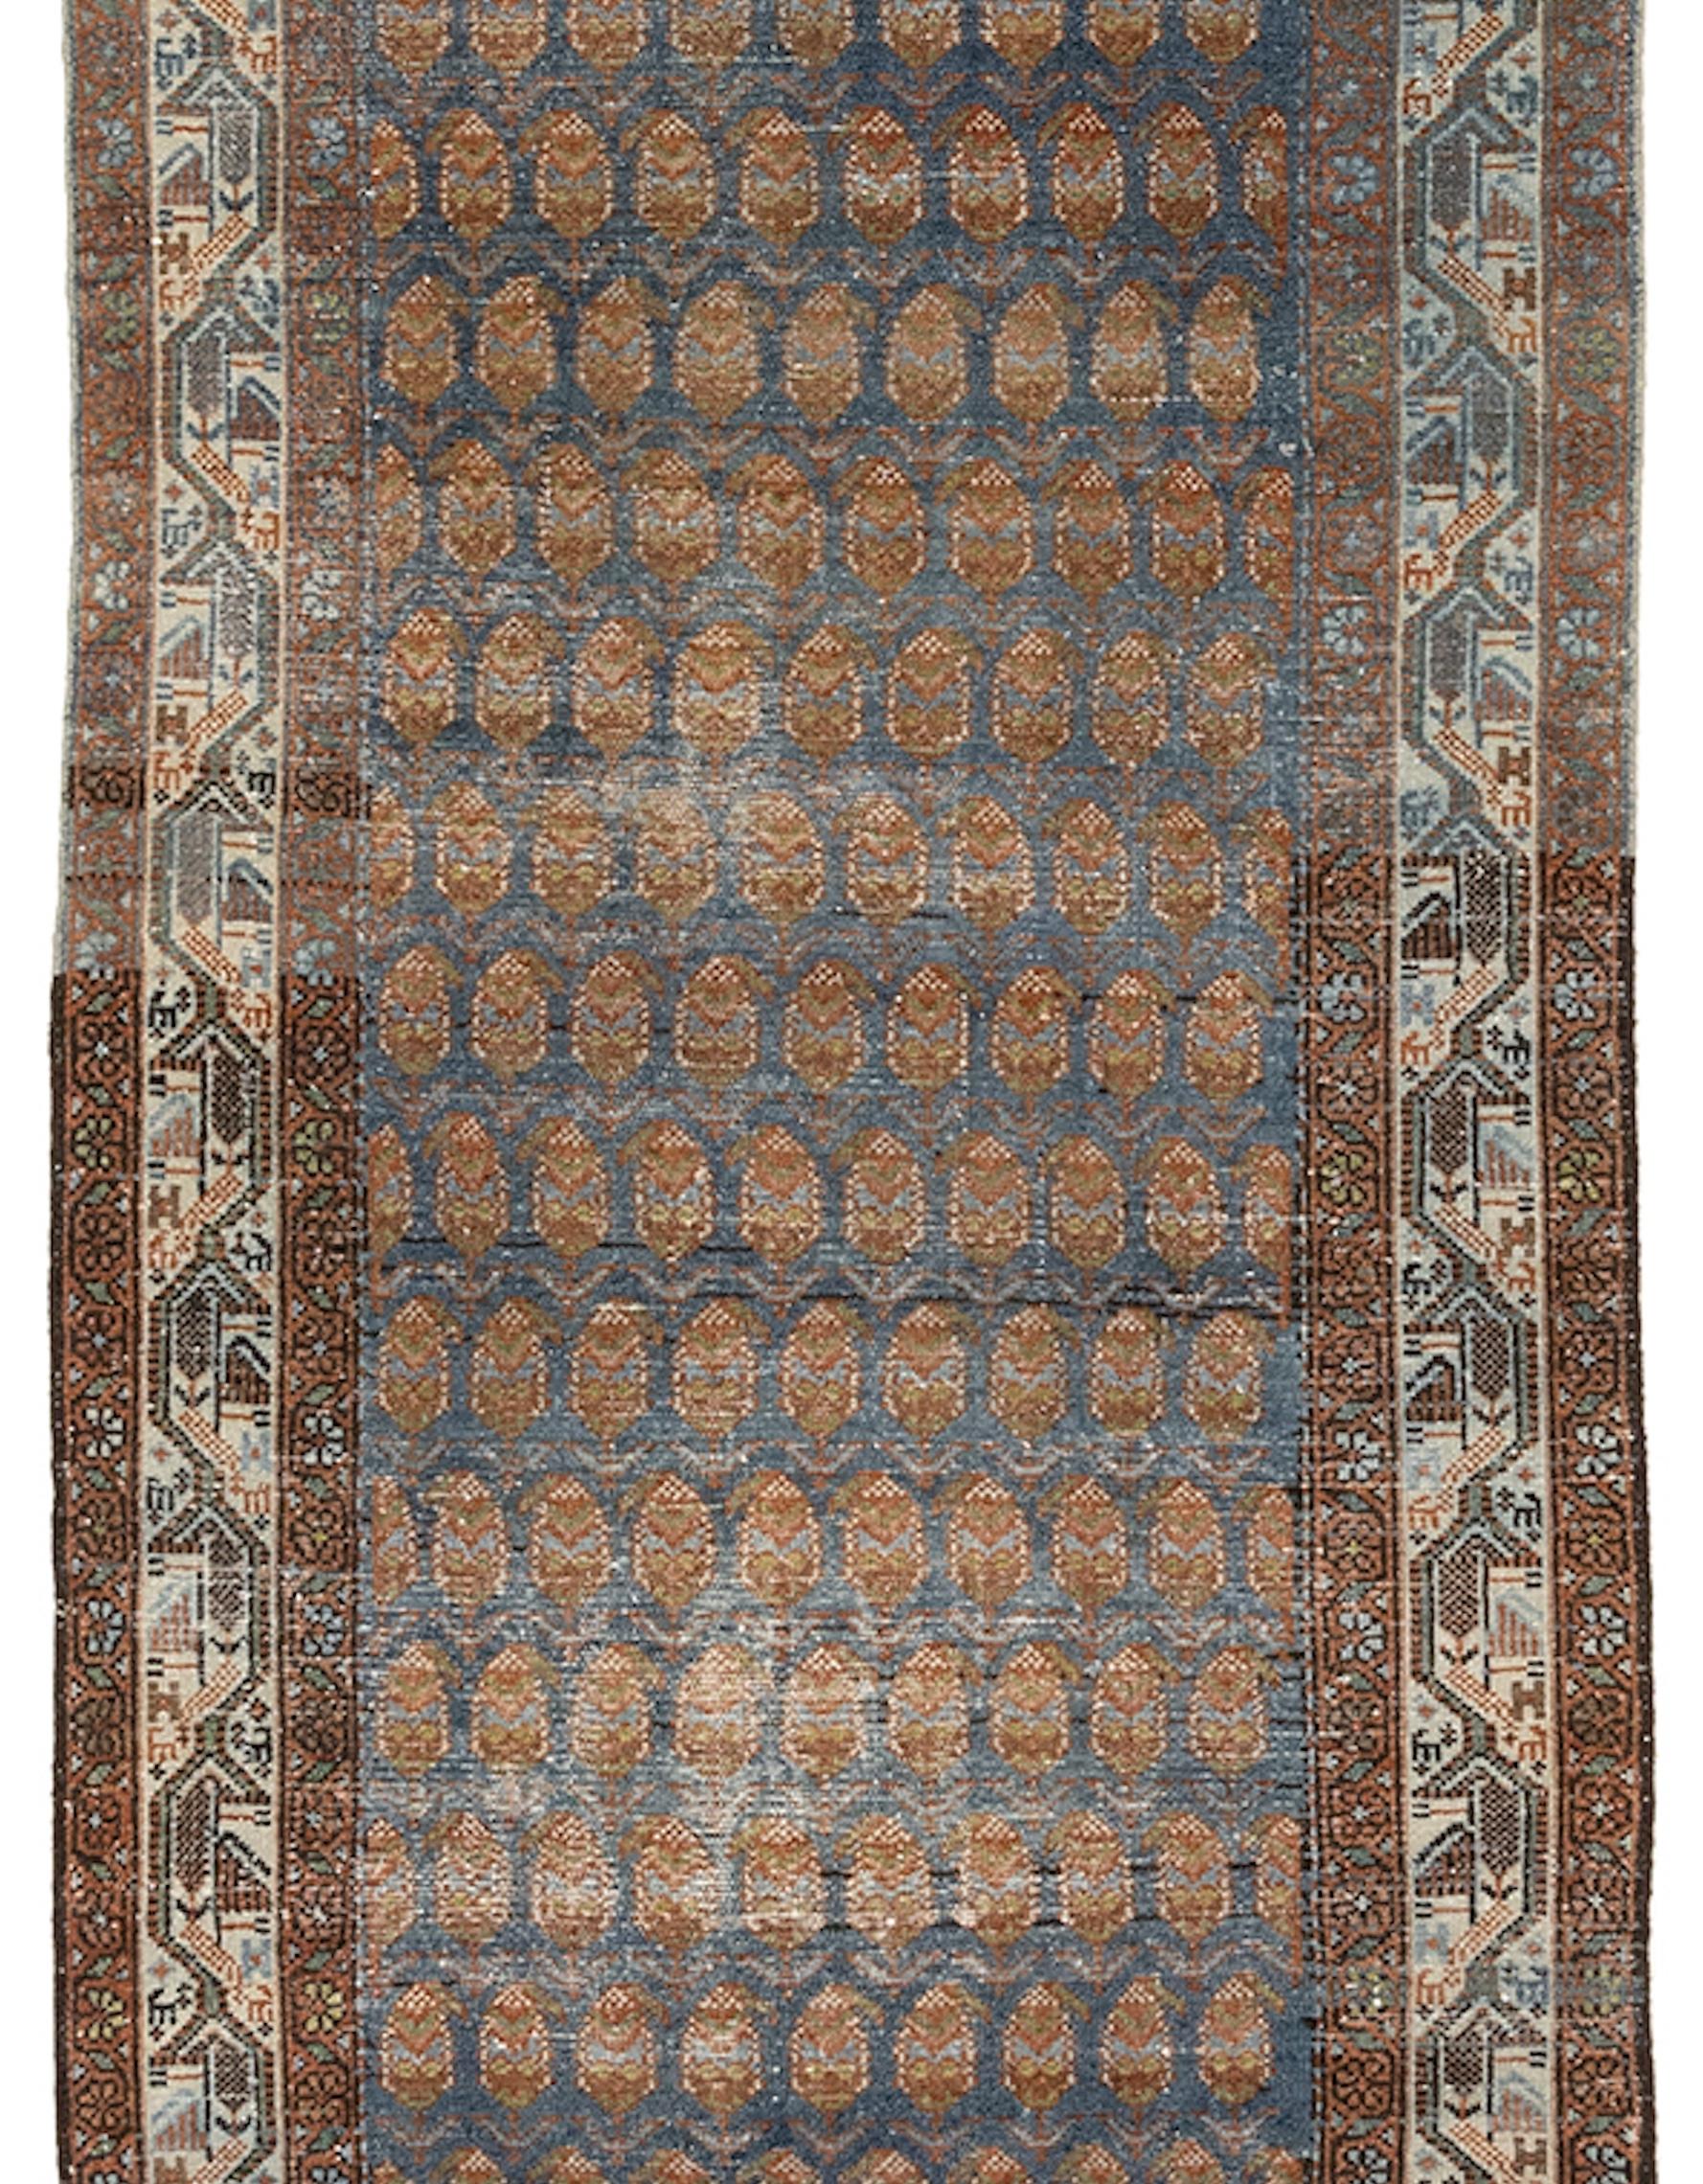 This antique Seneh runner is a remarkable piece of woven art that embodies the timeless beauty and craftsmanship of Persian rugs. Originating from the Seneh region of Iran, this runner exemplifies the rich cultural heritage and artistic traditions